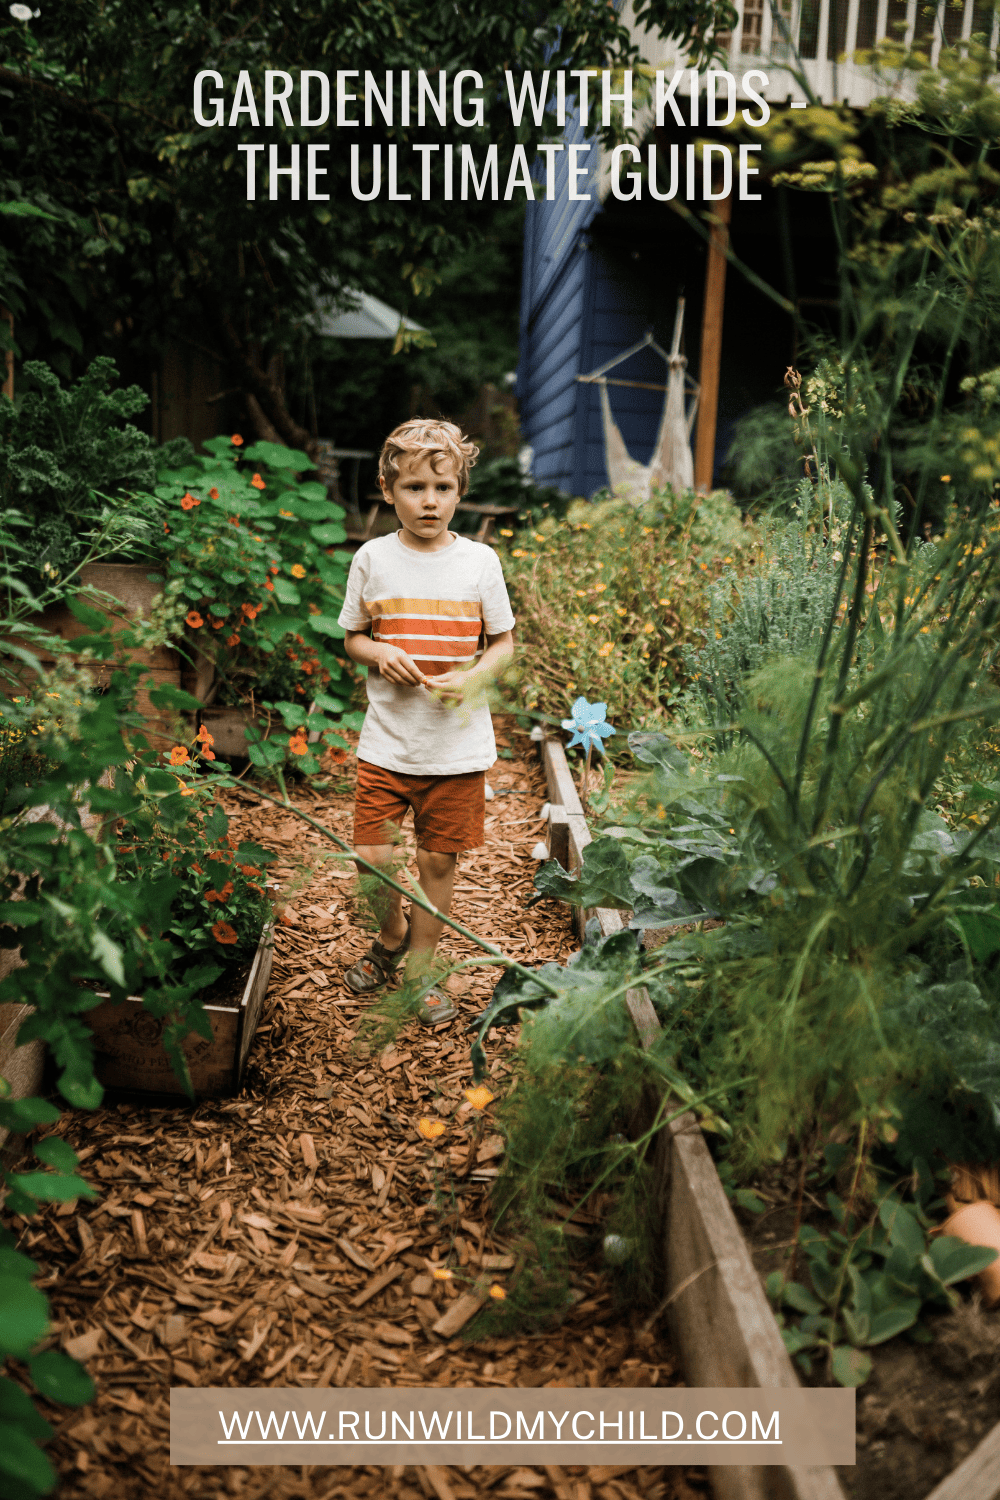 The ultimate guide to gardening with kids